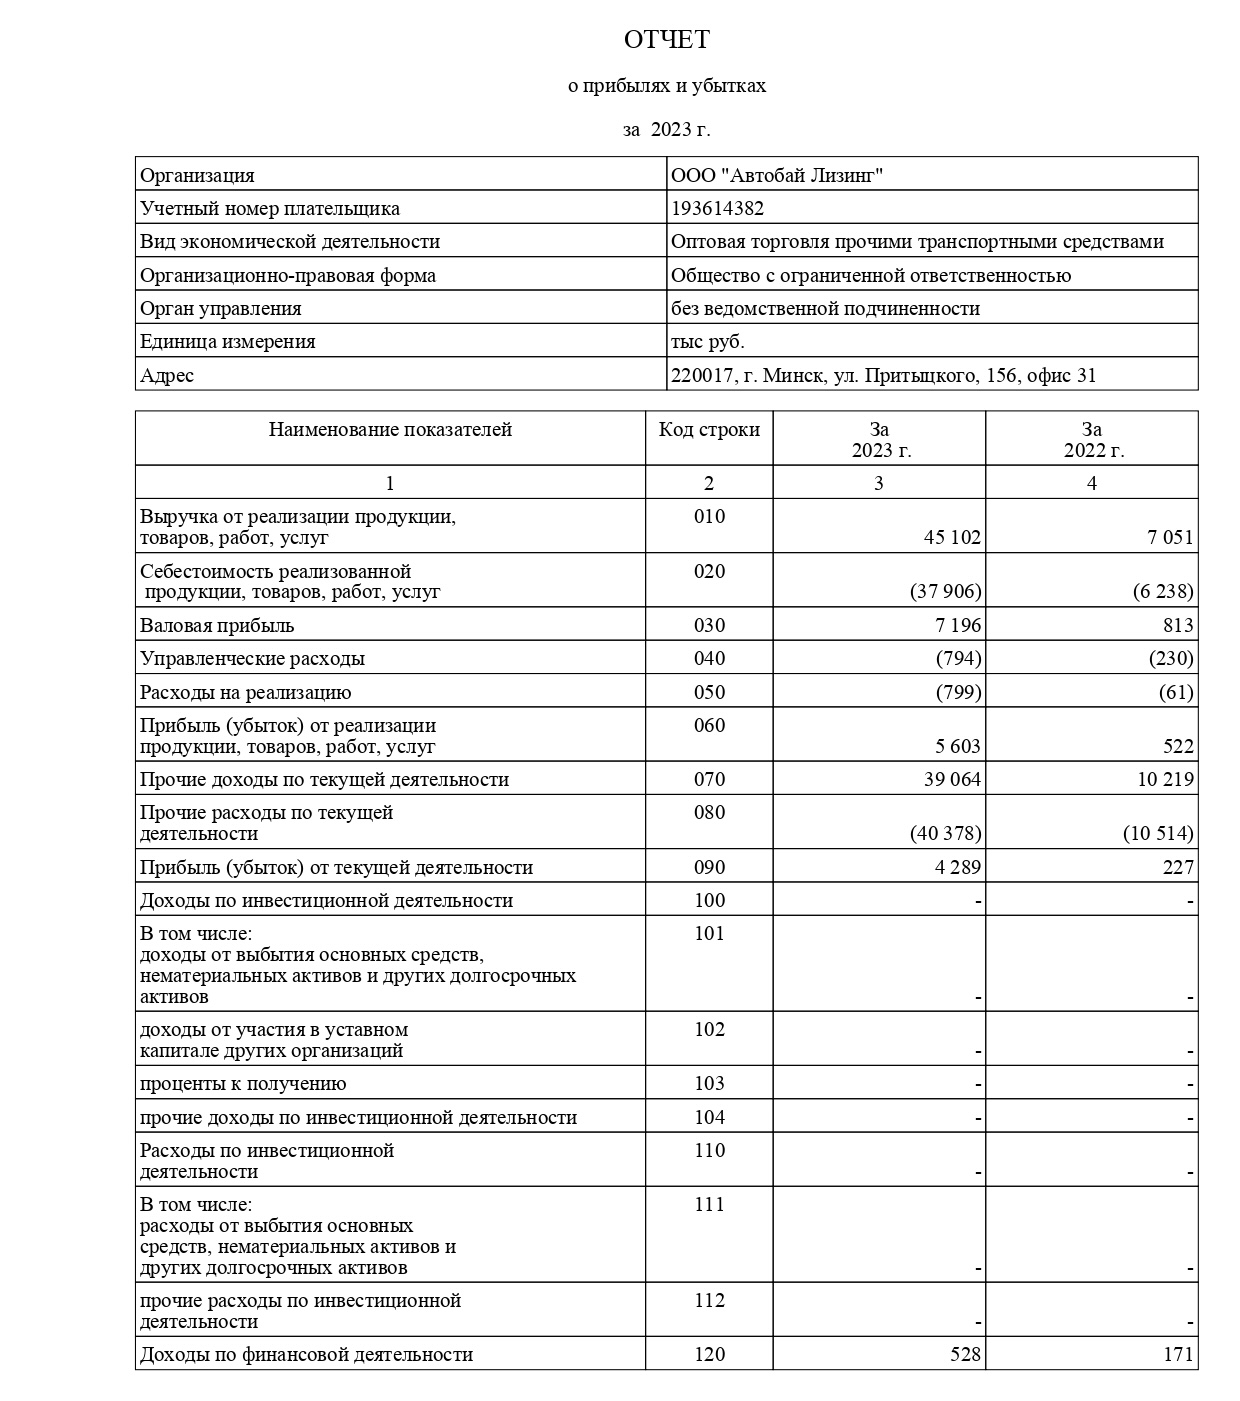 PROFIT AND LOSS STATEMENT FOR OOO AUTOBY LEASING_1